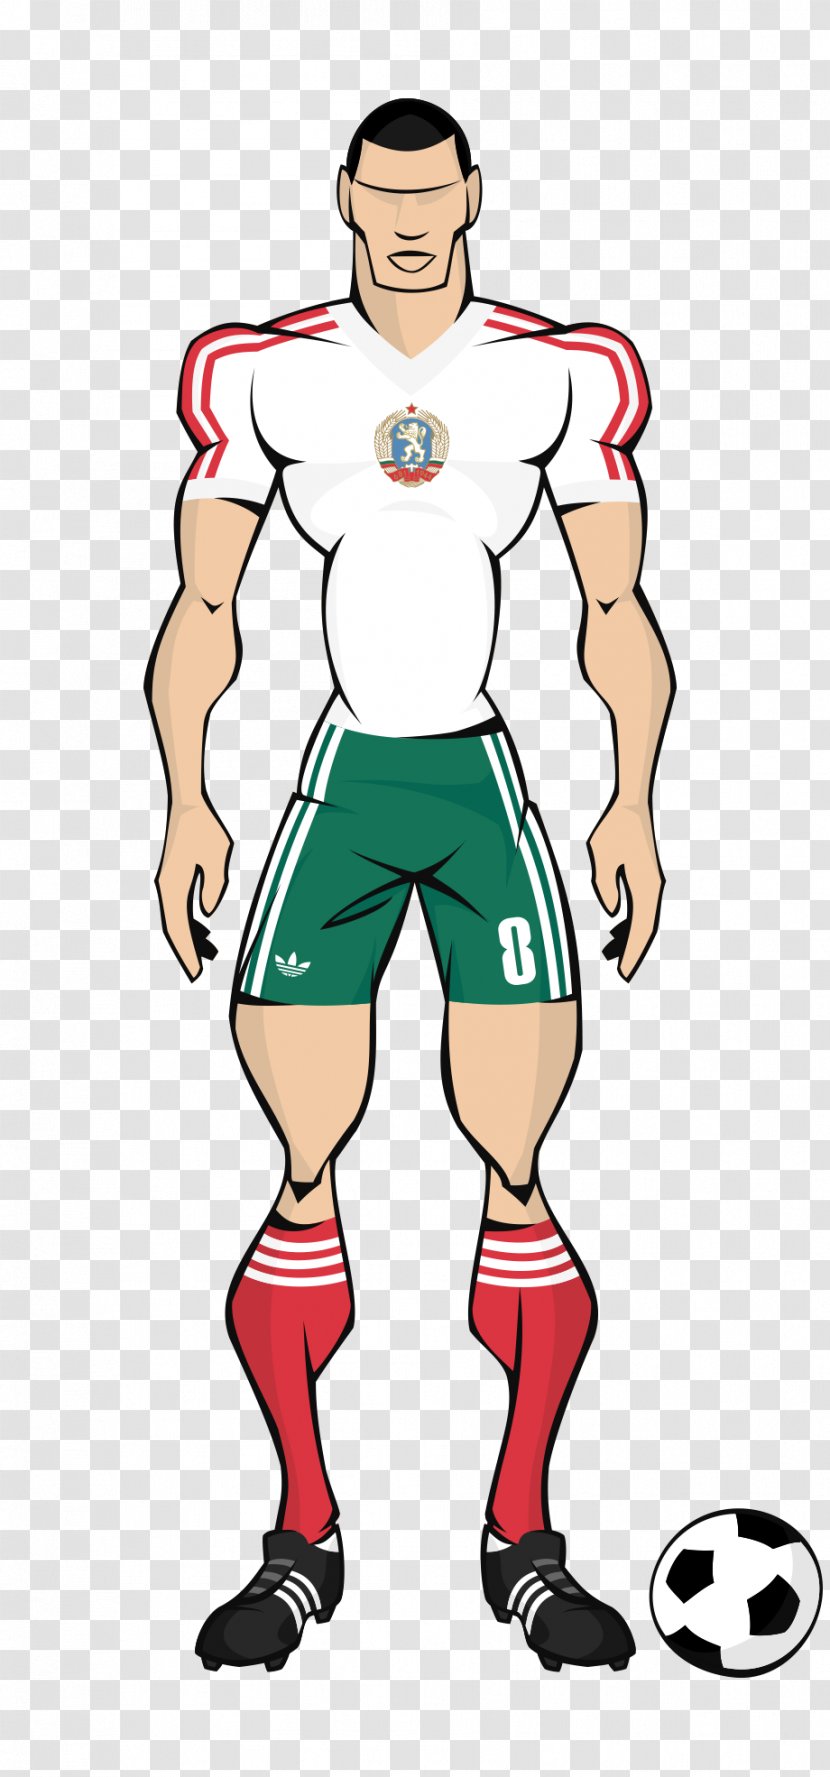 Association Football Manager World Cup Club Atlético Independiente UEFA Euro 2016 - Northern Ireland National Team Transparent PNG